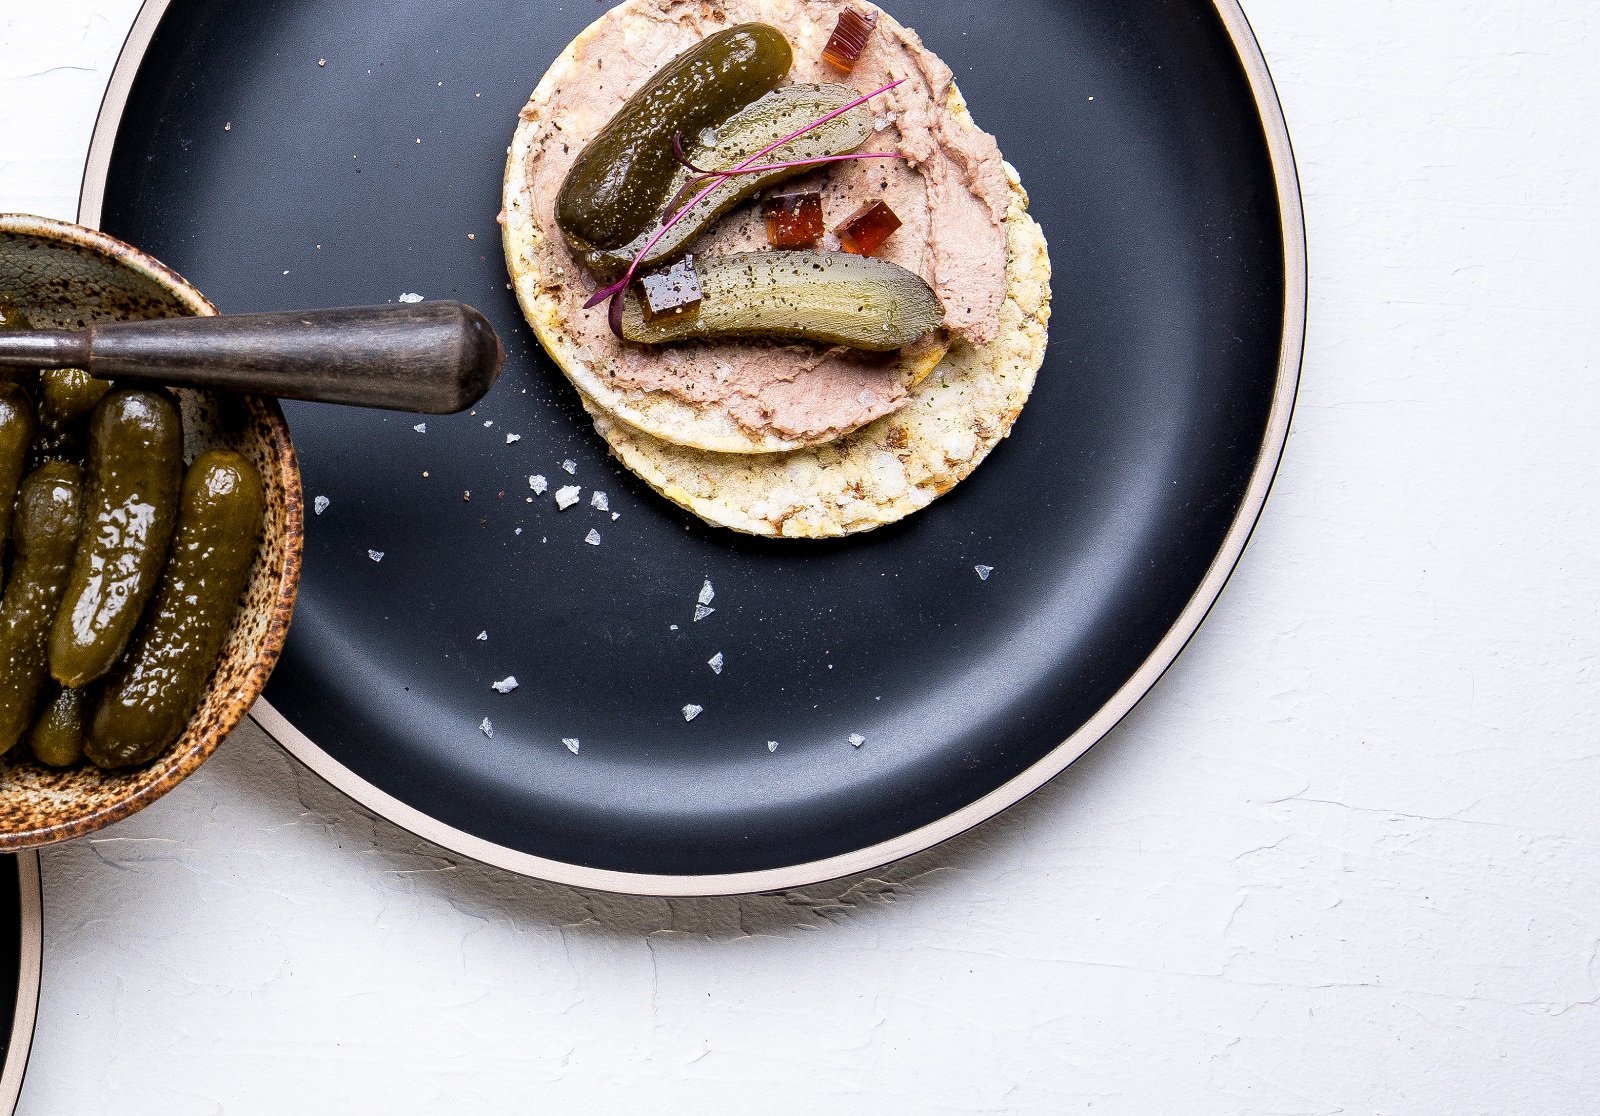 Pate & Gherkins on CORN THINS slices